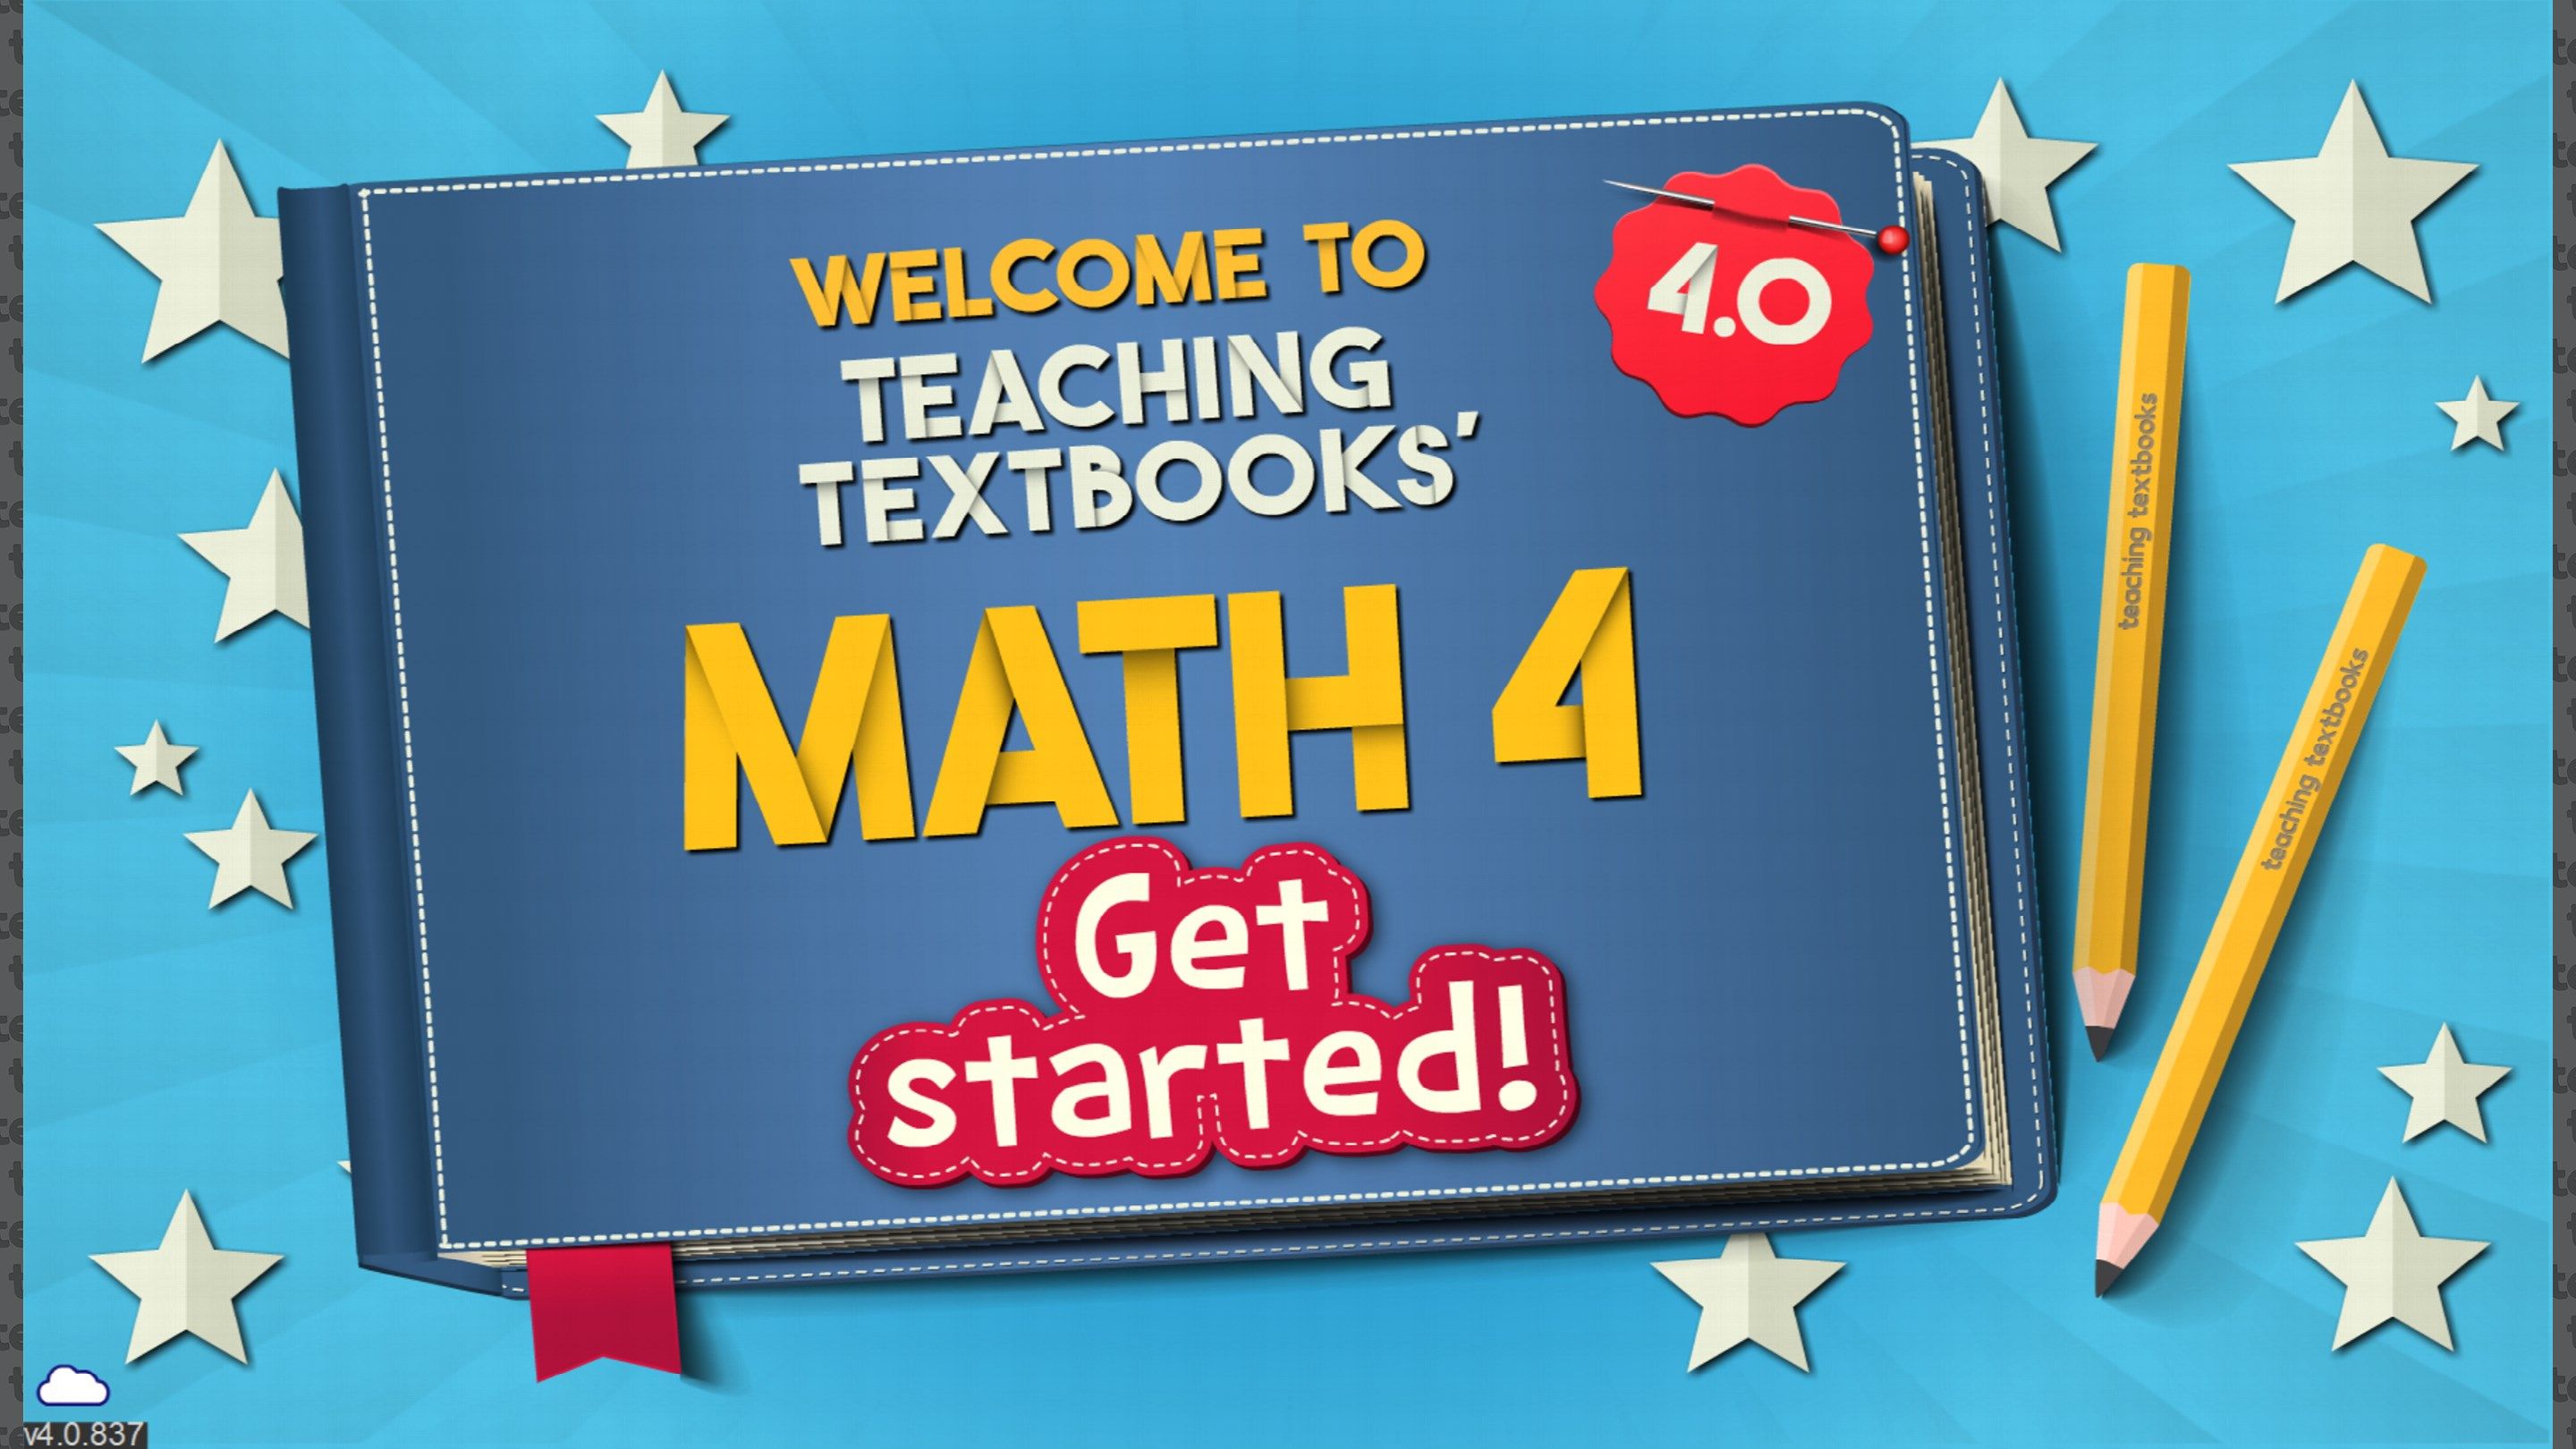 When the app launches, all you have to do to get started is log in with your Teaching Textbooks parent account, and it will connect to your Math 4 enrollment.